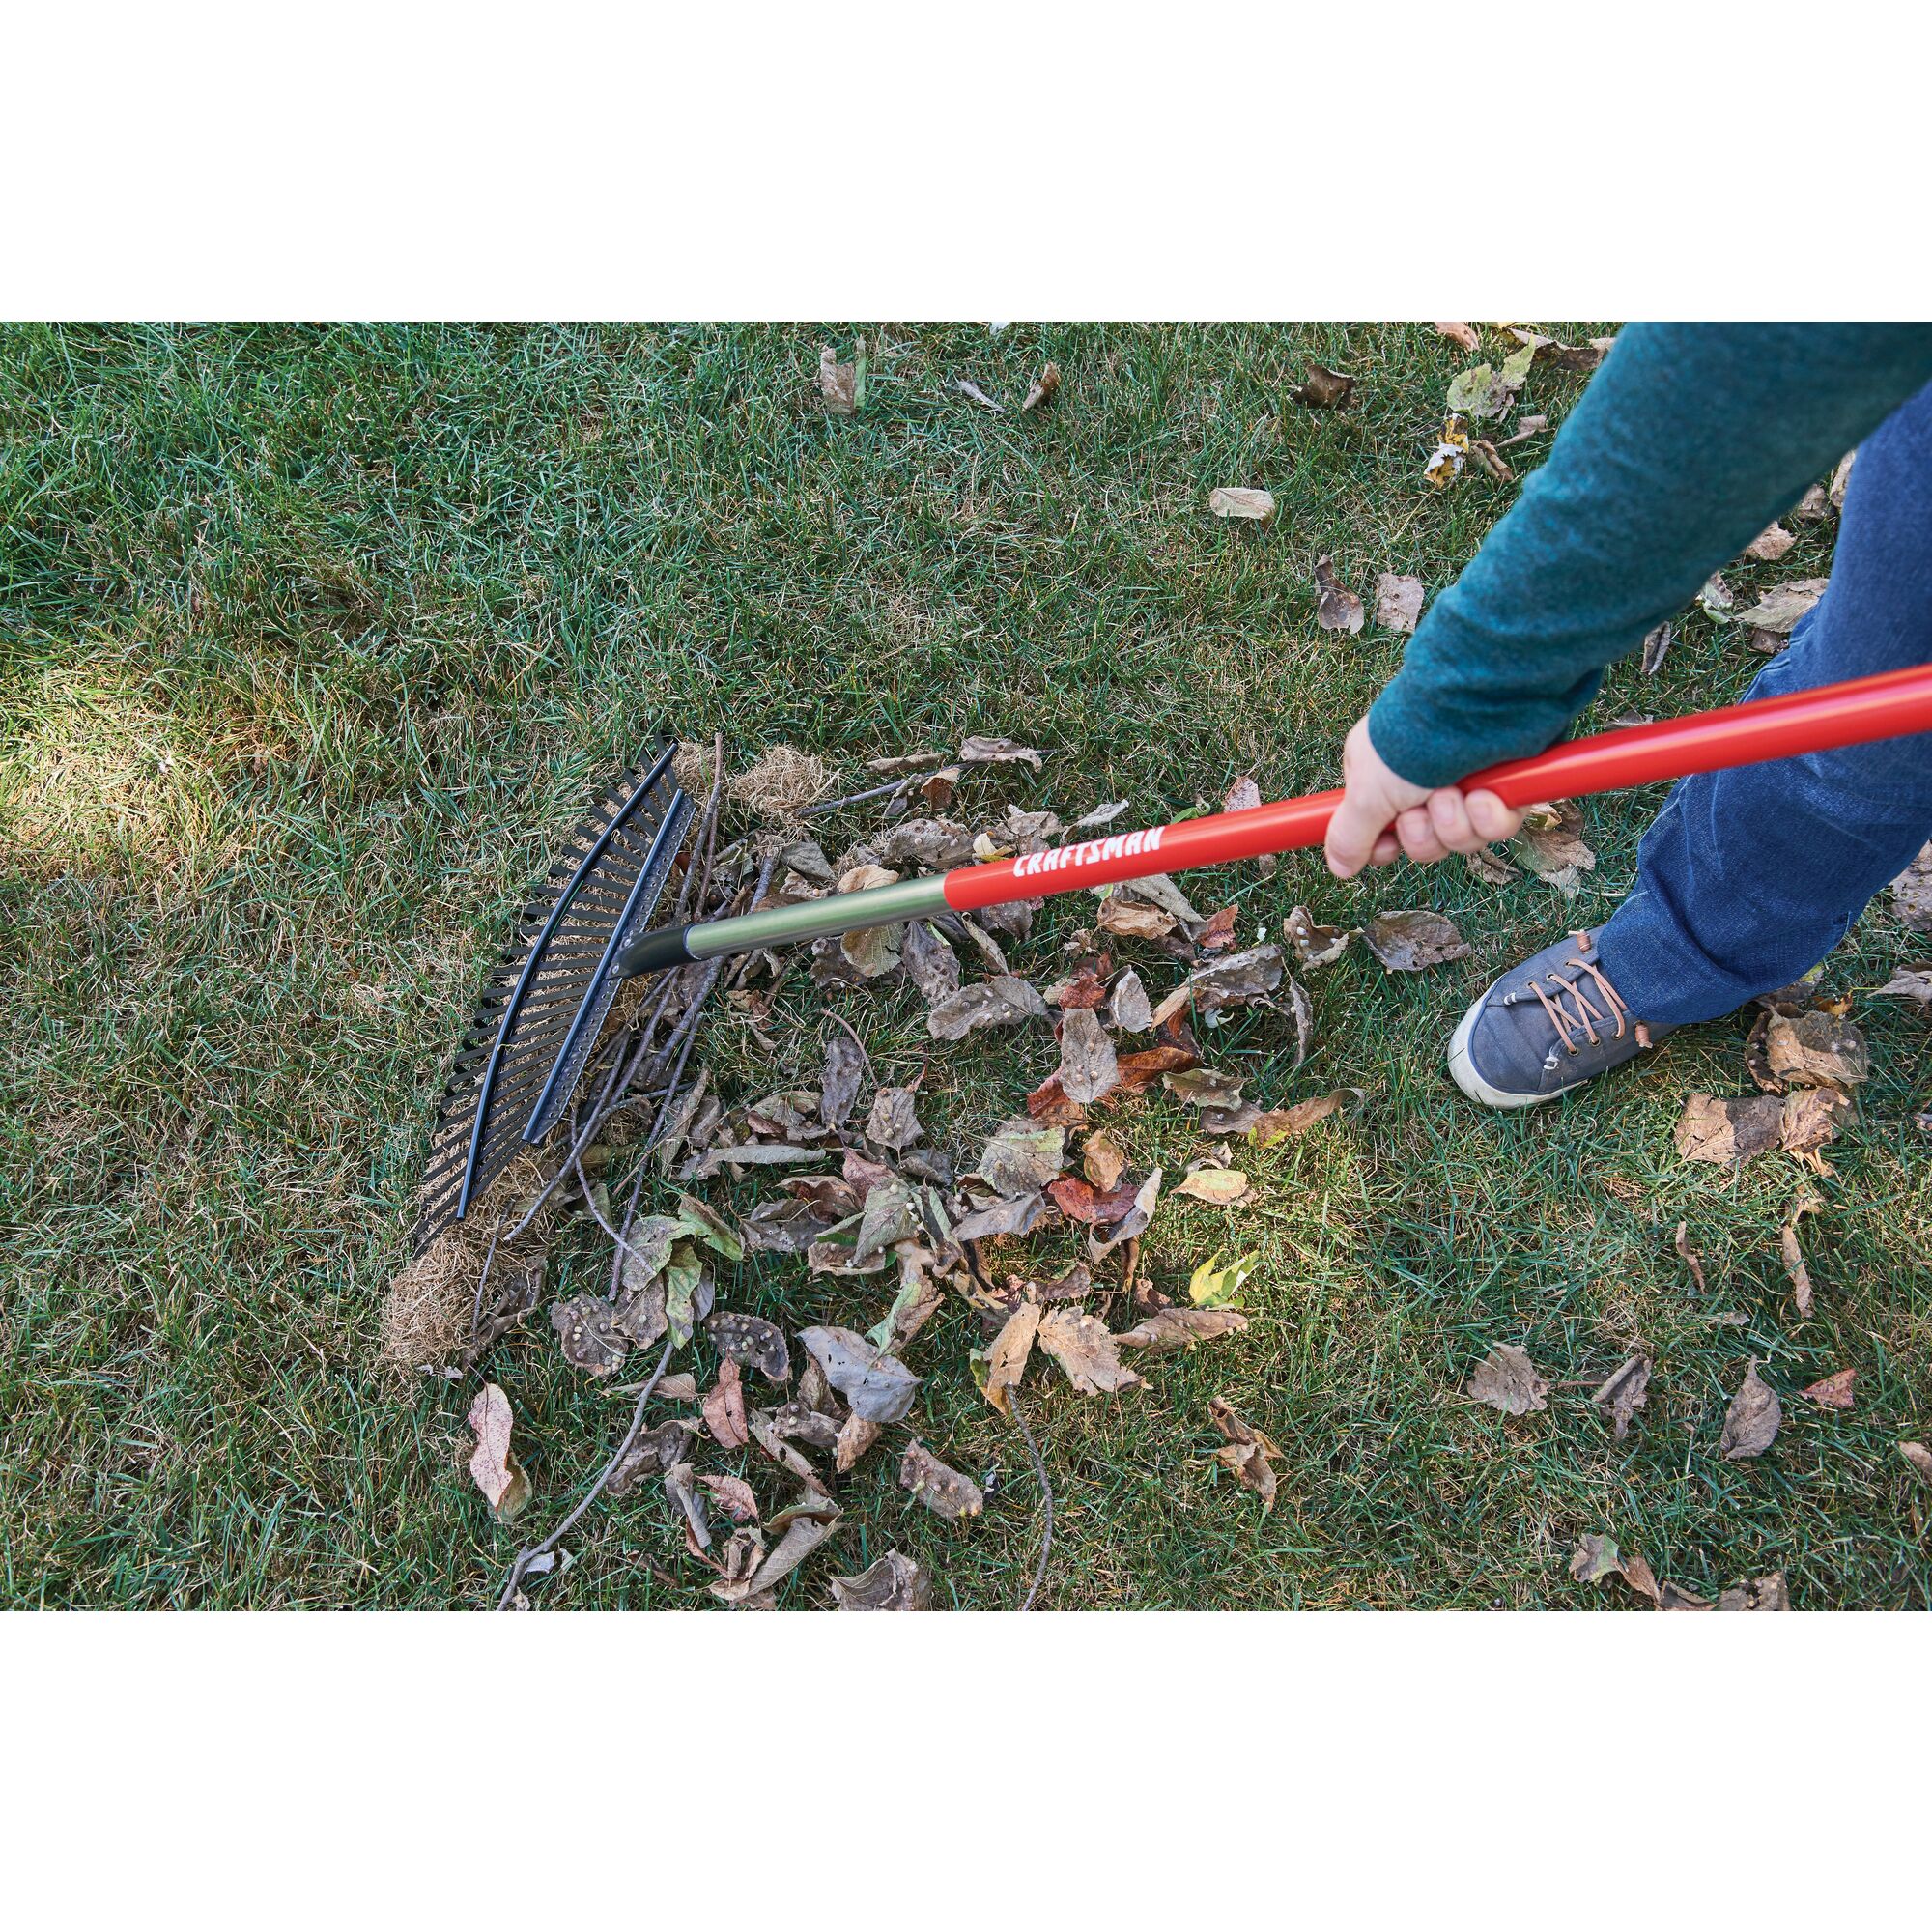 25 tine aluminum handle lawn rake being used to rake leaves from the ground.